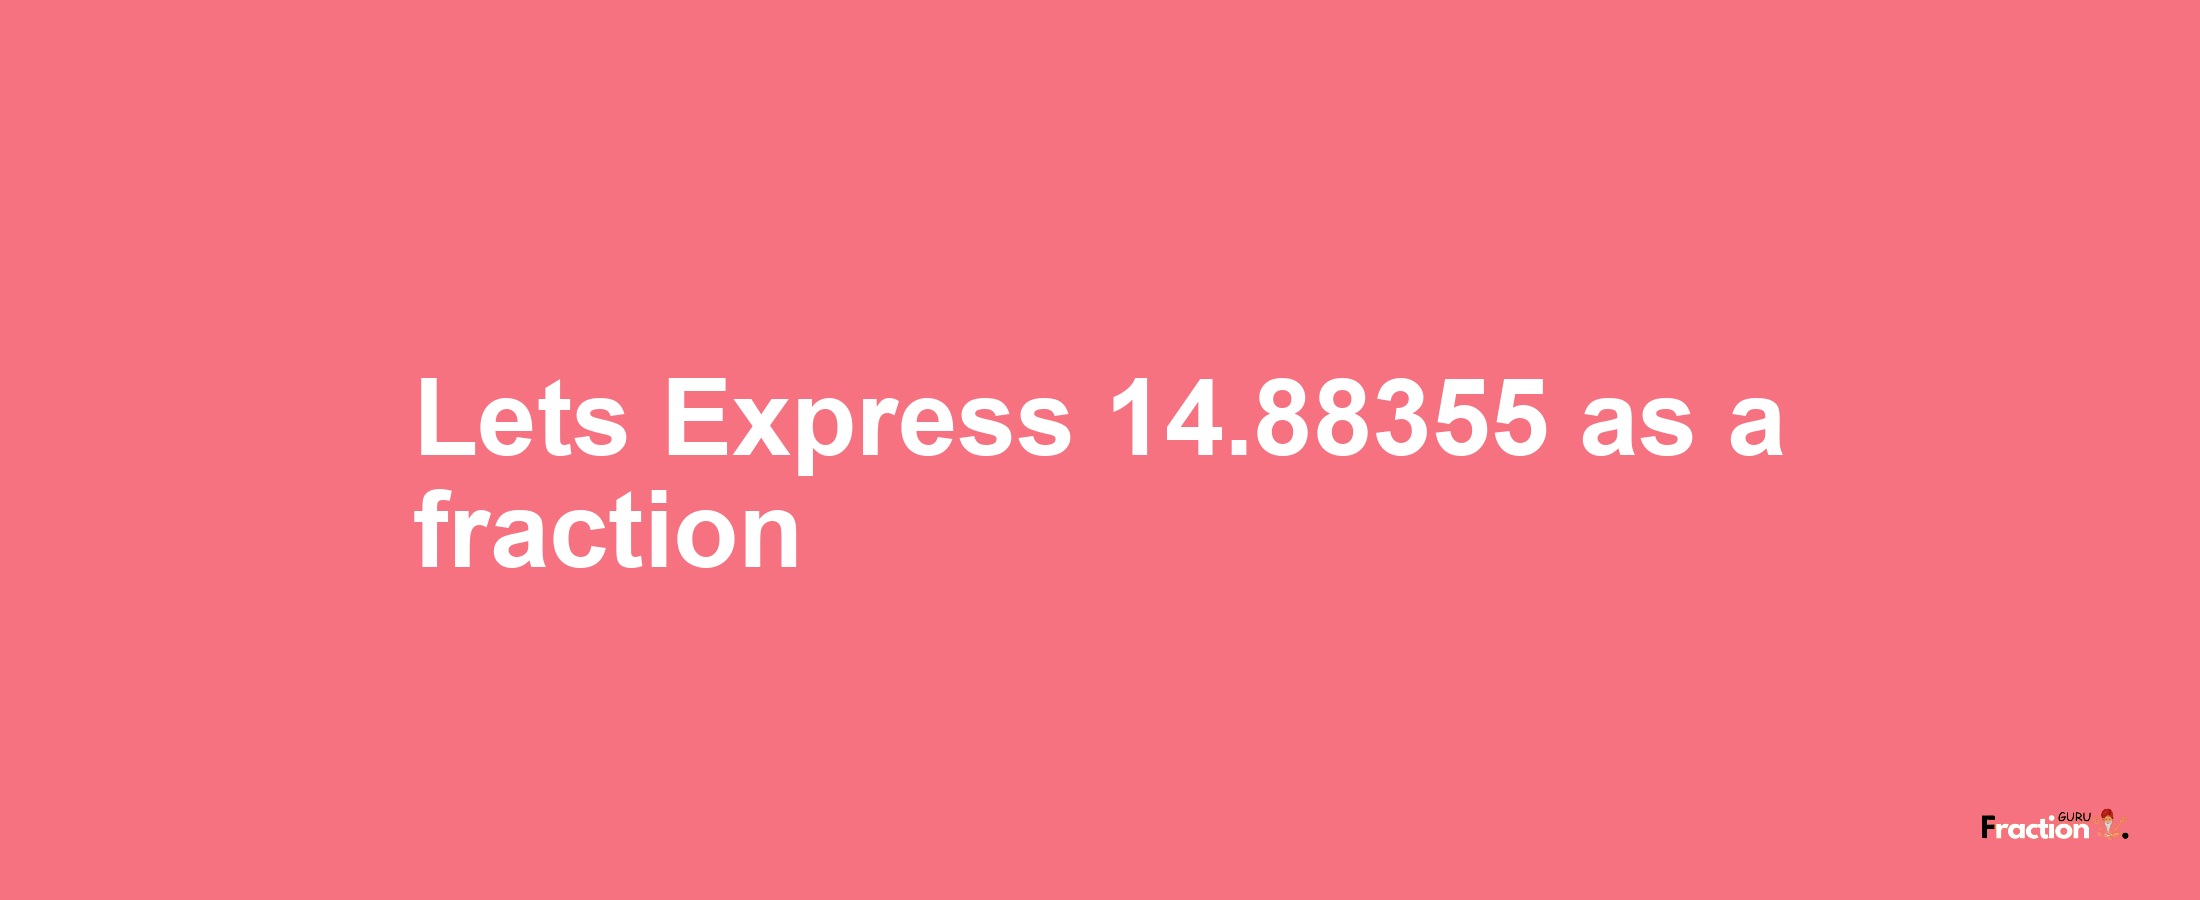 Lets Express 14.88355 as afraction